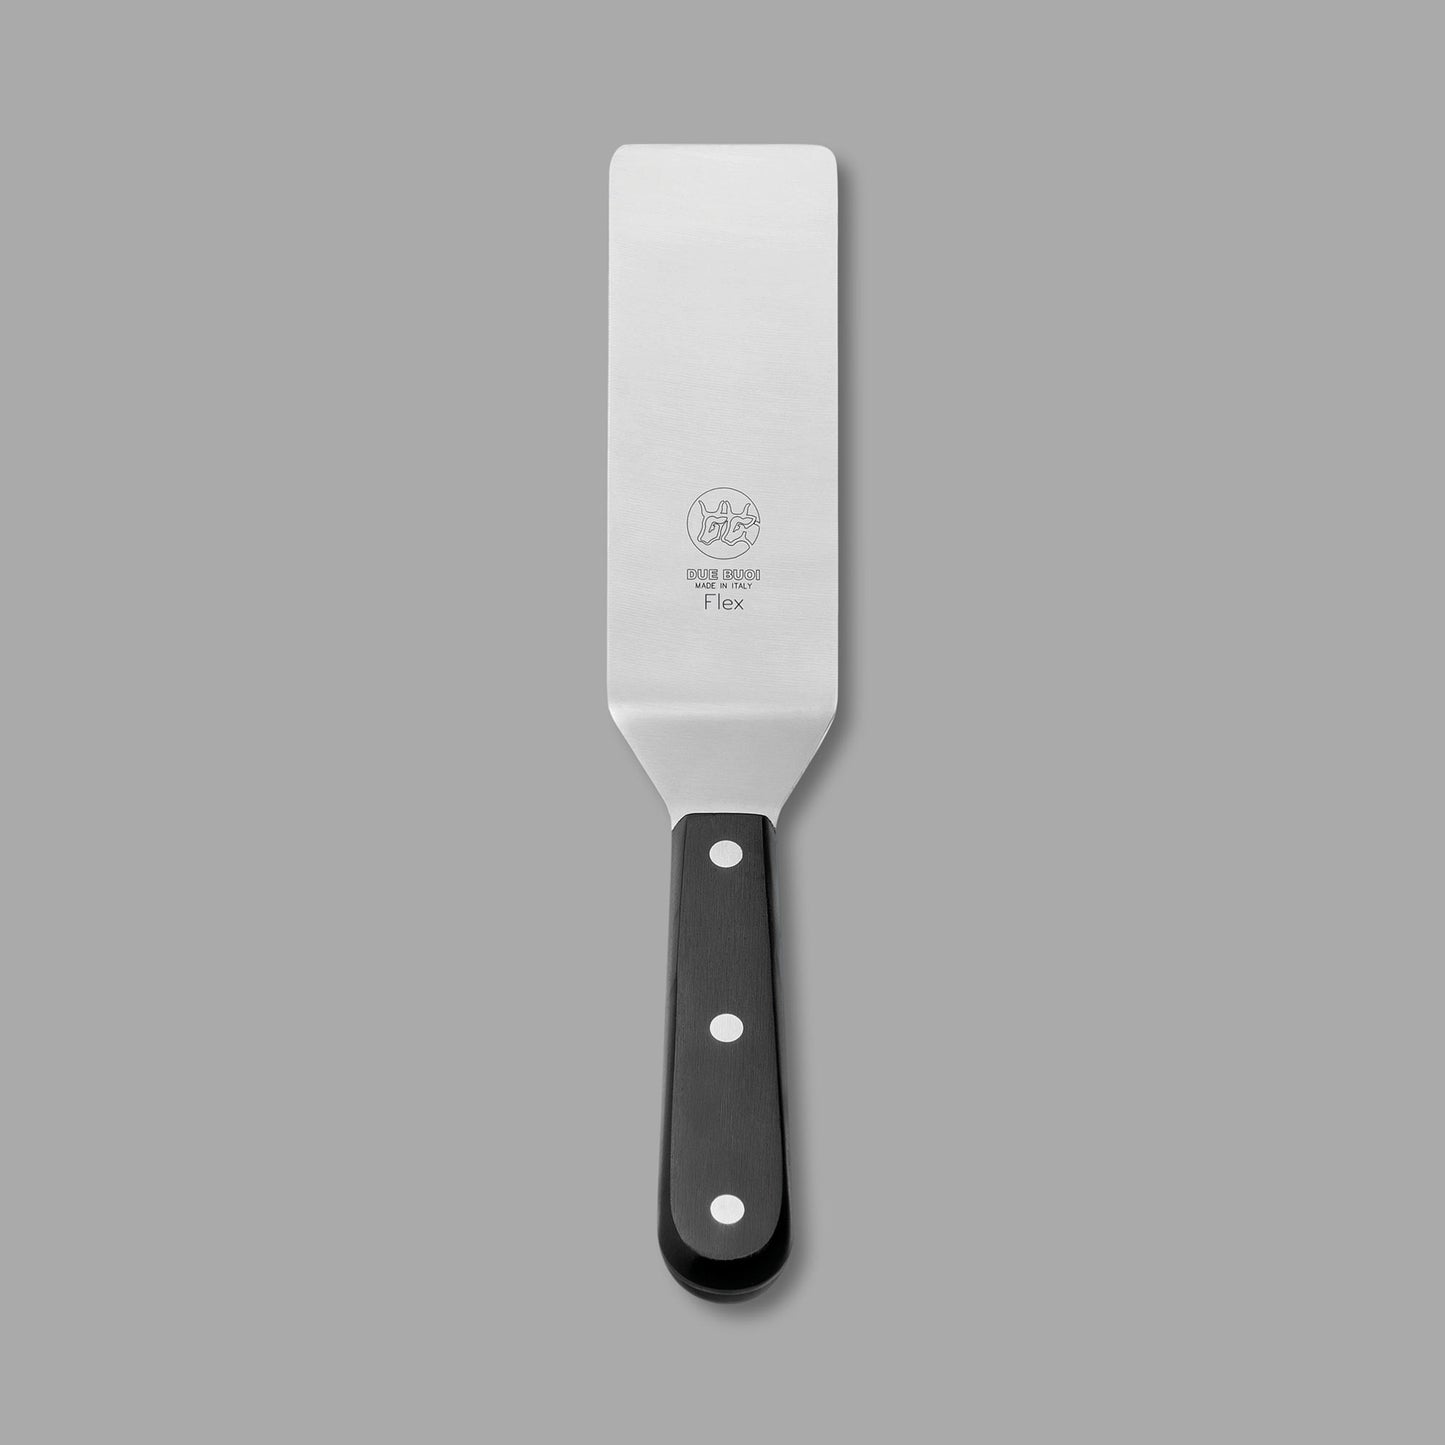 DUE BUOI set Wide Spatula blade dimension 4 x 61/3 and Narrow blade  dimension 2 x 6 1/3. Full Ta…See more DUE BUOI set Wide Spatula blade